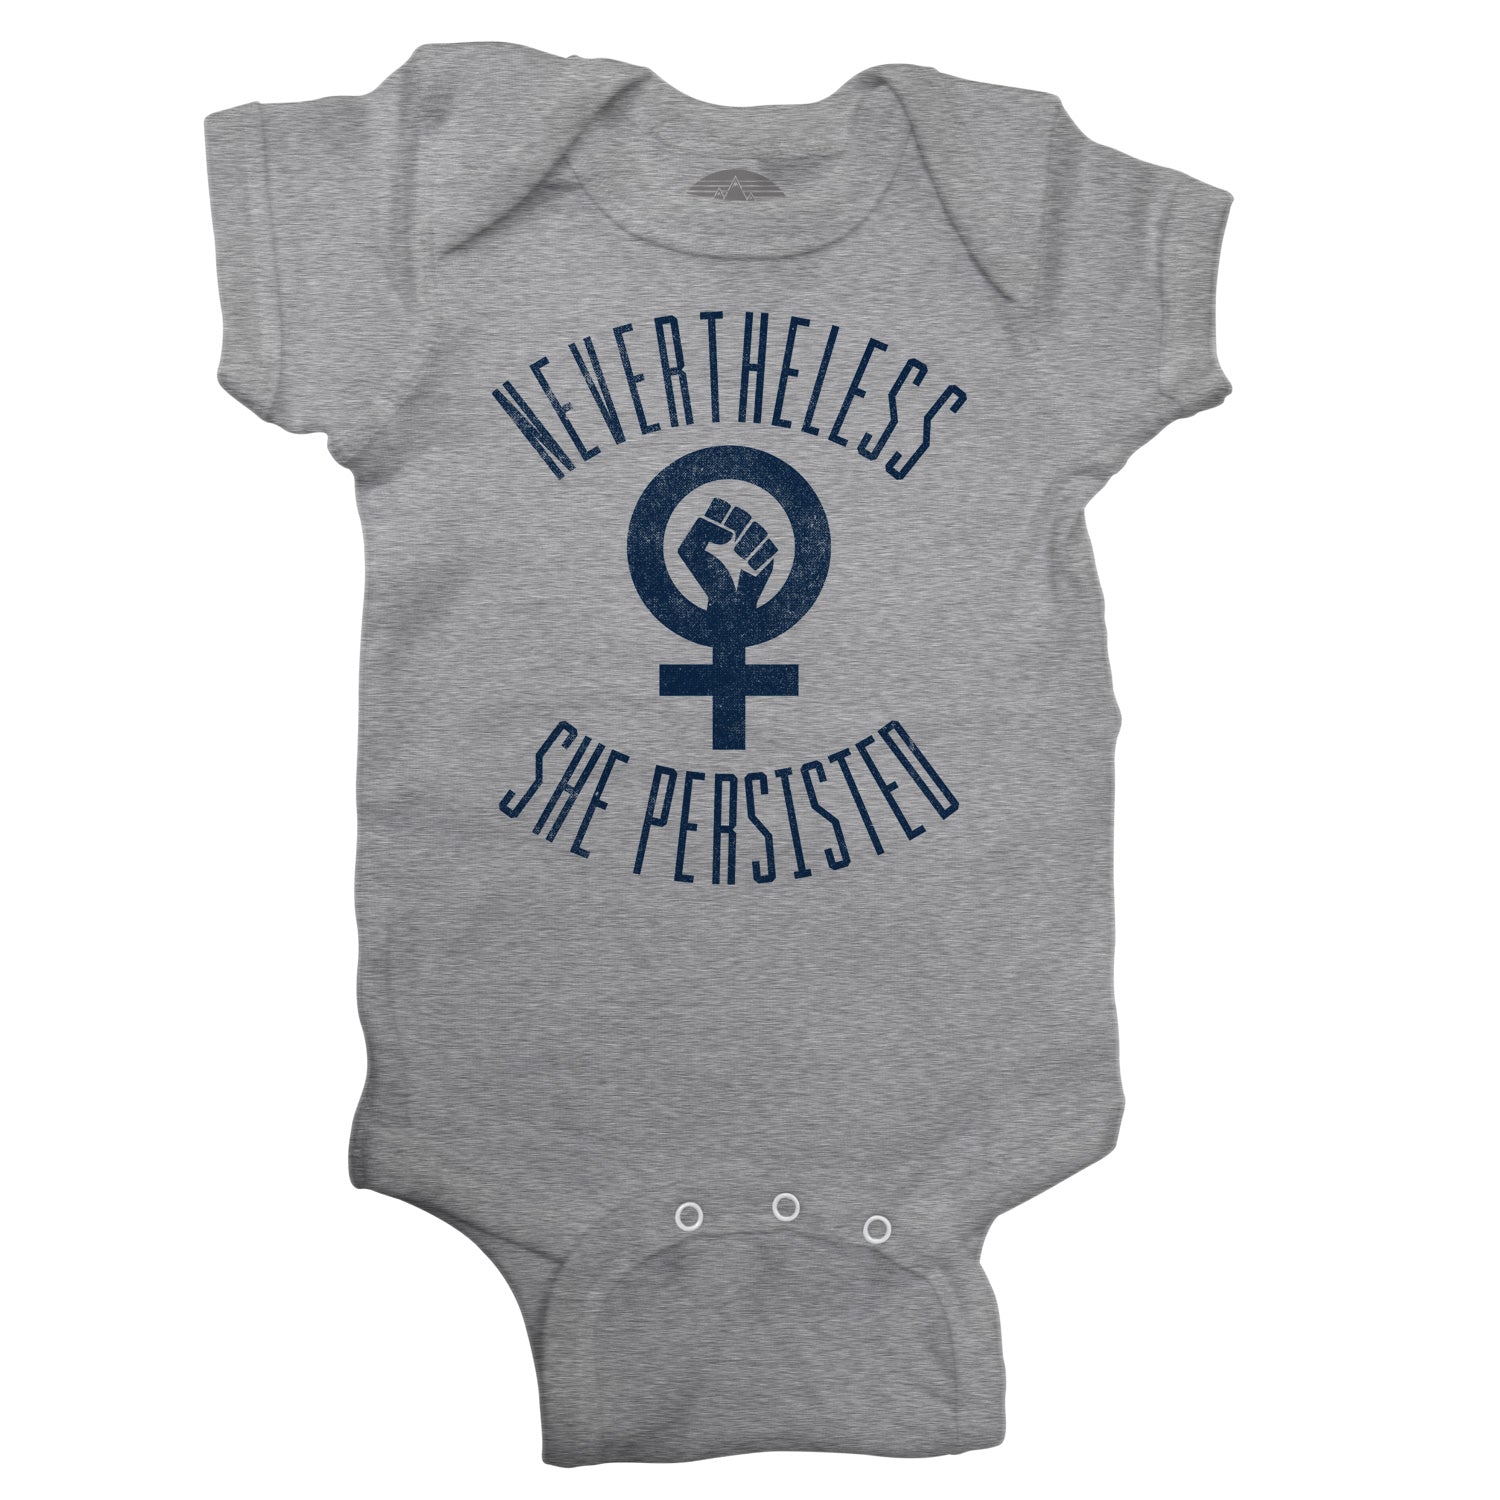 Nevertheless She Persisted Infant Bodysuit - Unisex Fit